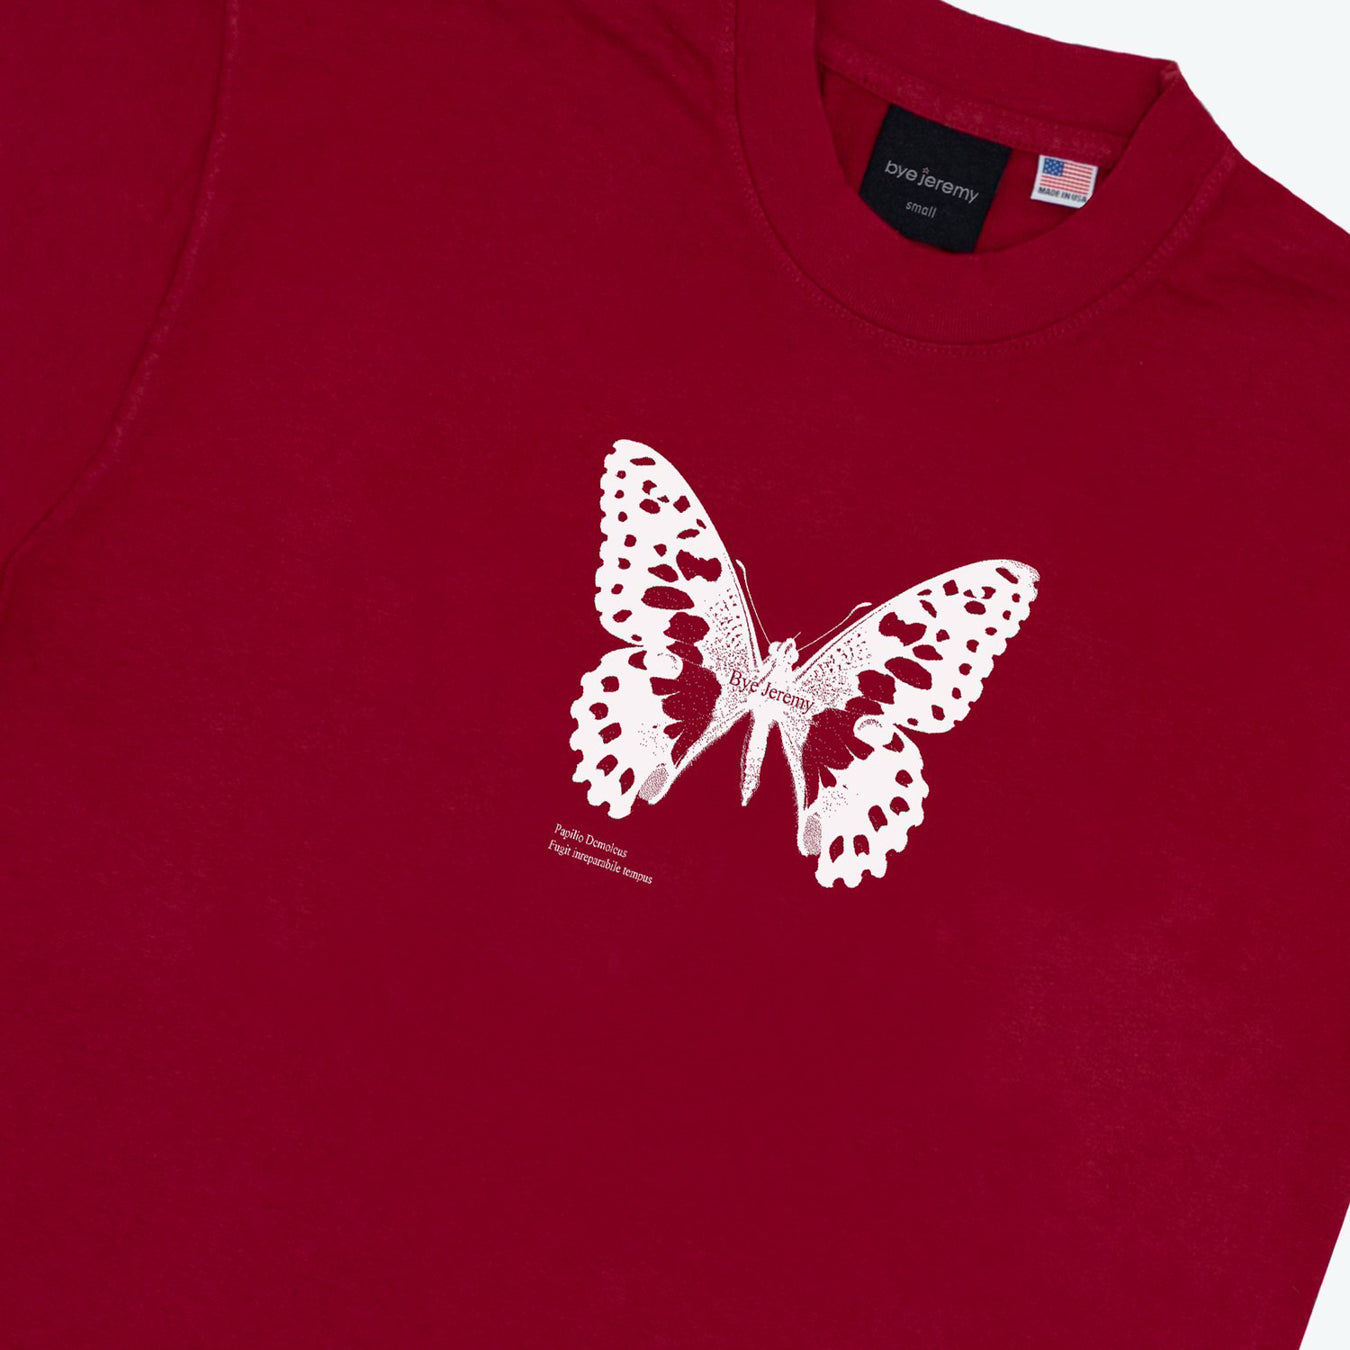 Butterfly Tee - Red